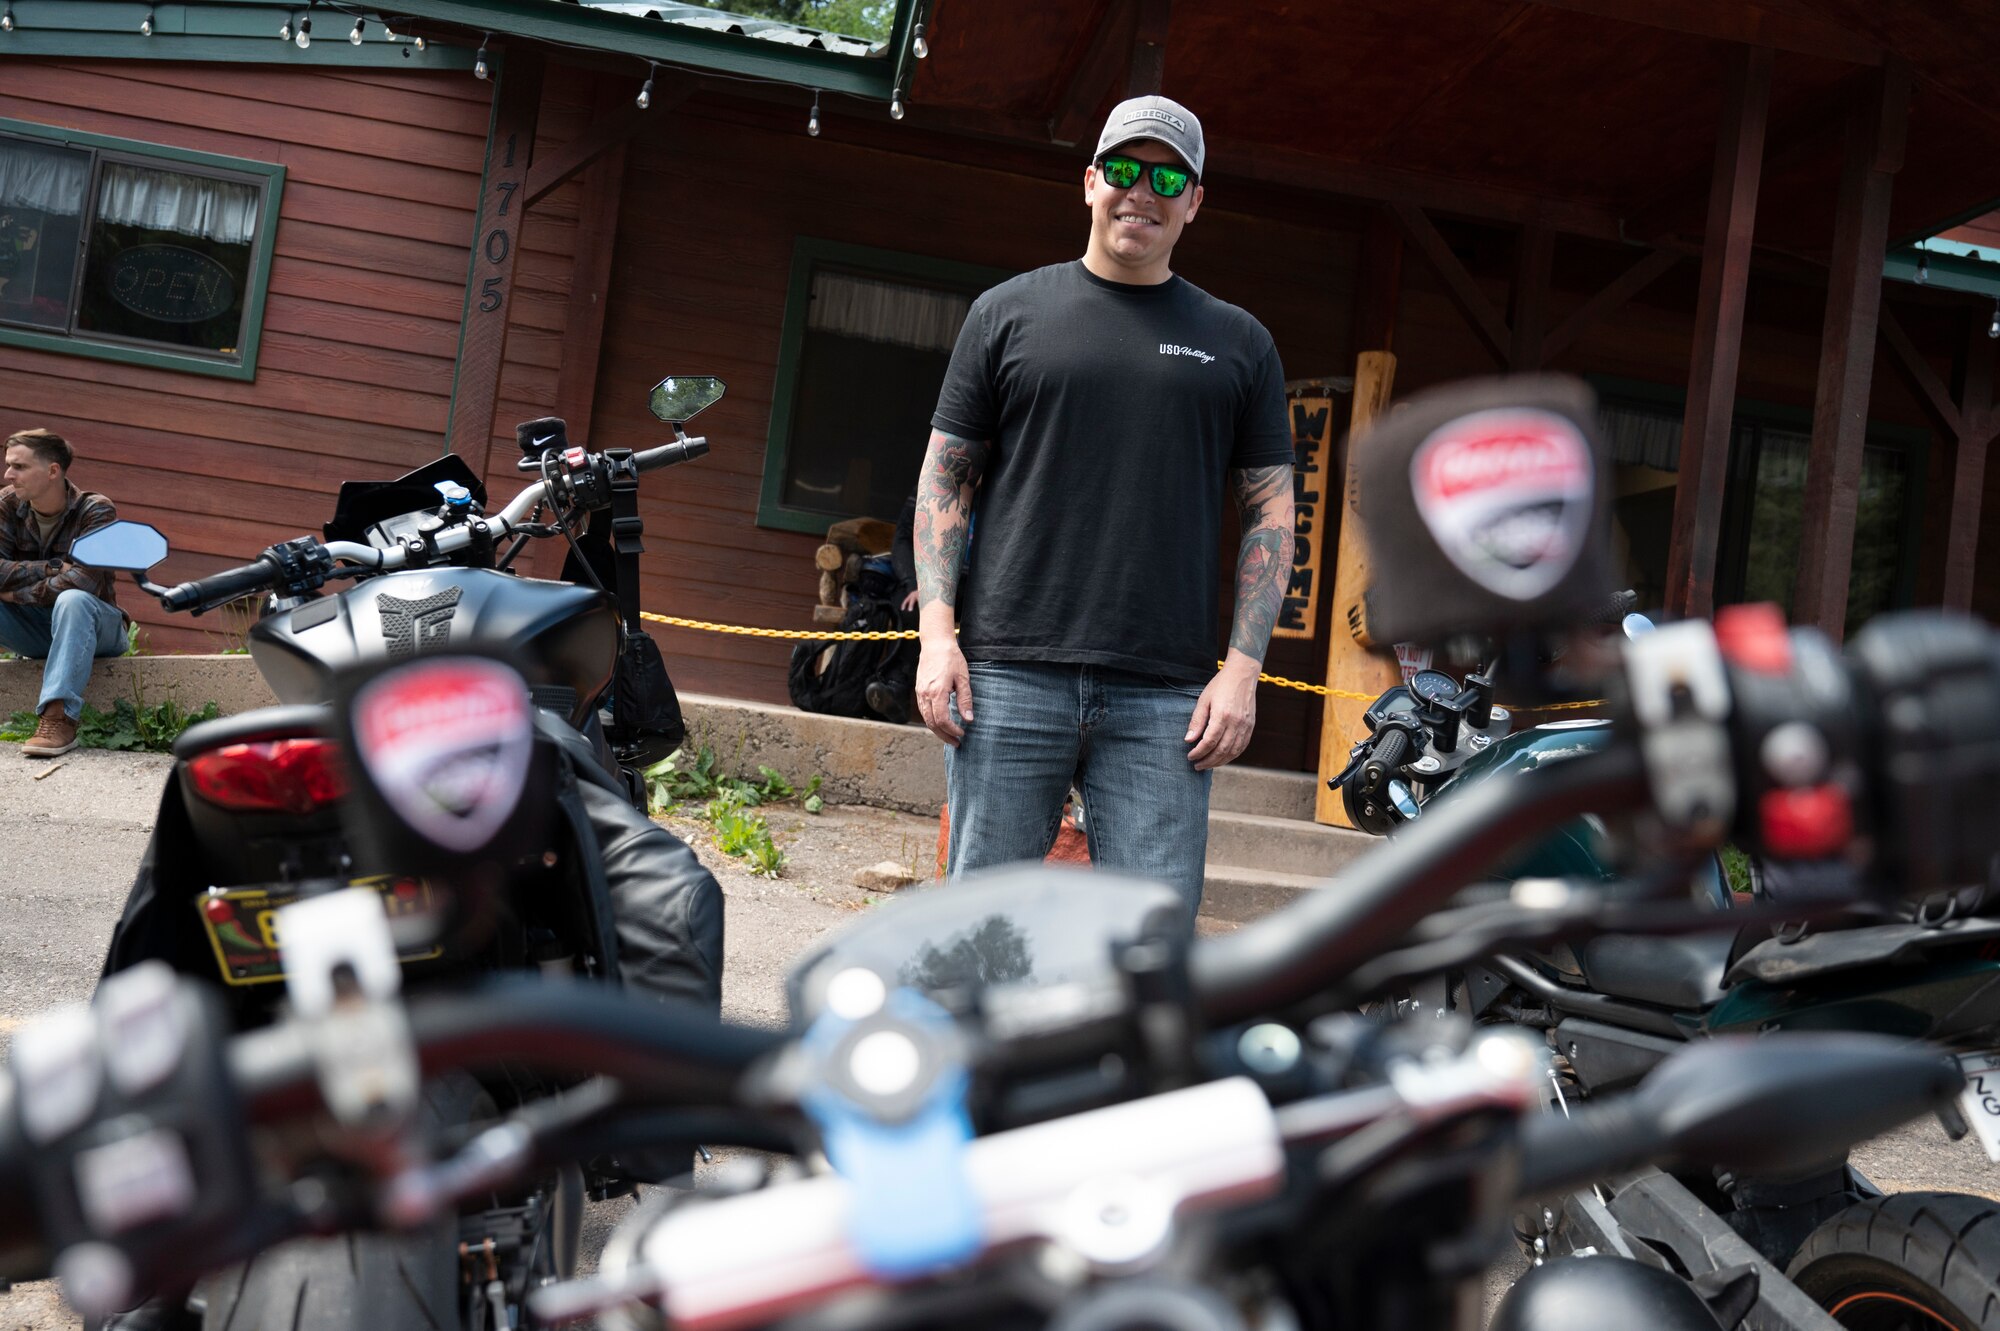 U.S. Air Force MSgt. Justin Bell, 49th Security Forces Squadron flight chief, stands in front of his Ducati Streetfighter motorcycle during group mentorship ride in Ruidoso, New Mexico, July 21, 2023. Mentorship rides allow commanders to coordinate counseling and inspections of riders to ensure their motorcycles are safe to operate and they possess serviceable safety equipment. (U.S. Air Force photo by Airman 1st Class Michelle Ferrari)